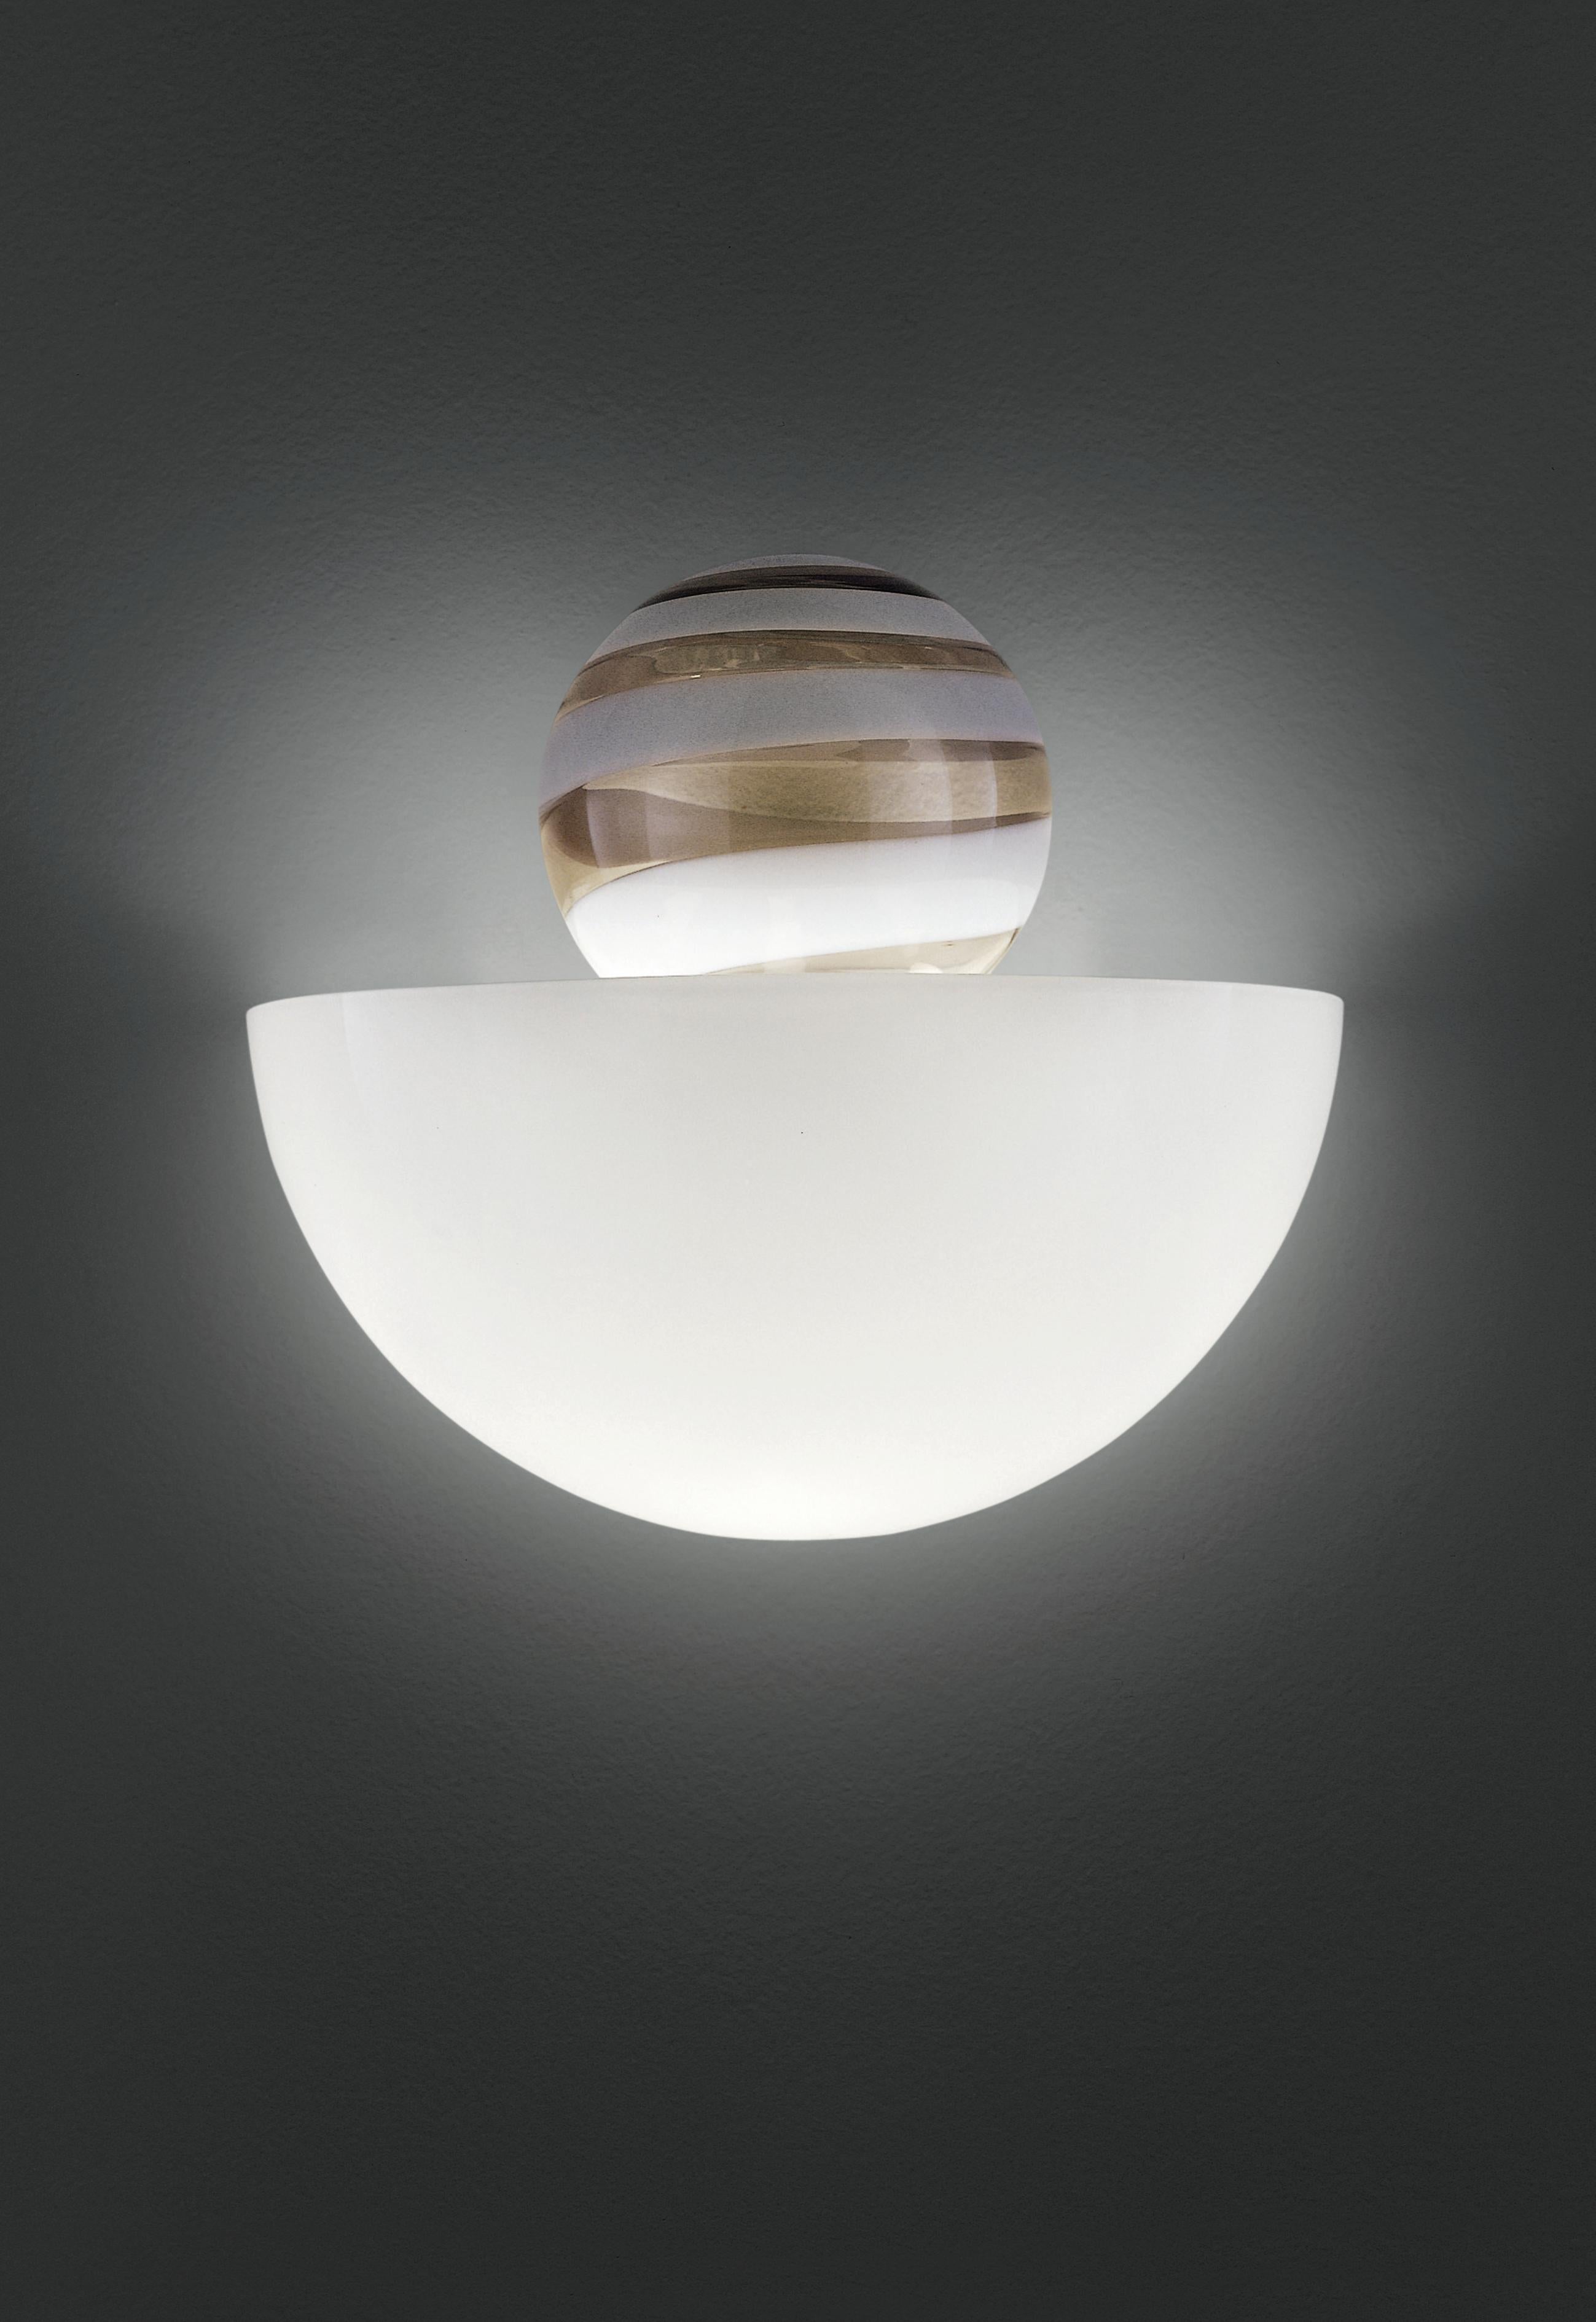 Abaco wall sconce in handmade blown glass. Simple and decorative lighting solution for any room or environment. Also available in other colors or as a flush light.

Dimensions: 21 cm D x 40 cm W x 35 cm H.